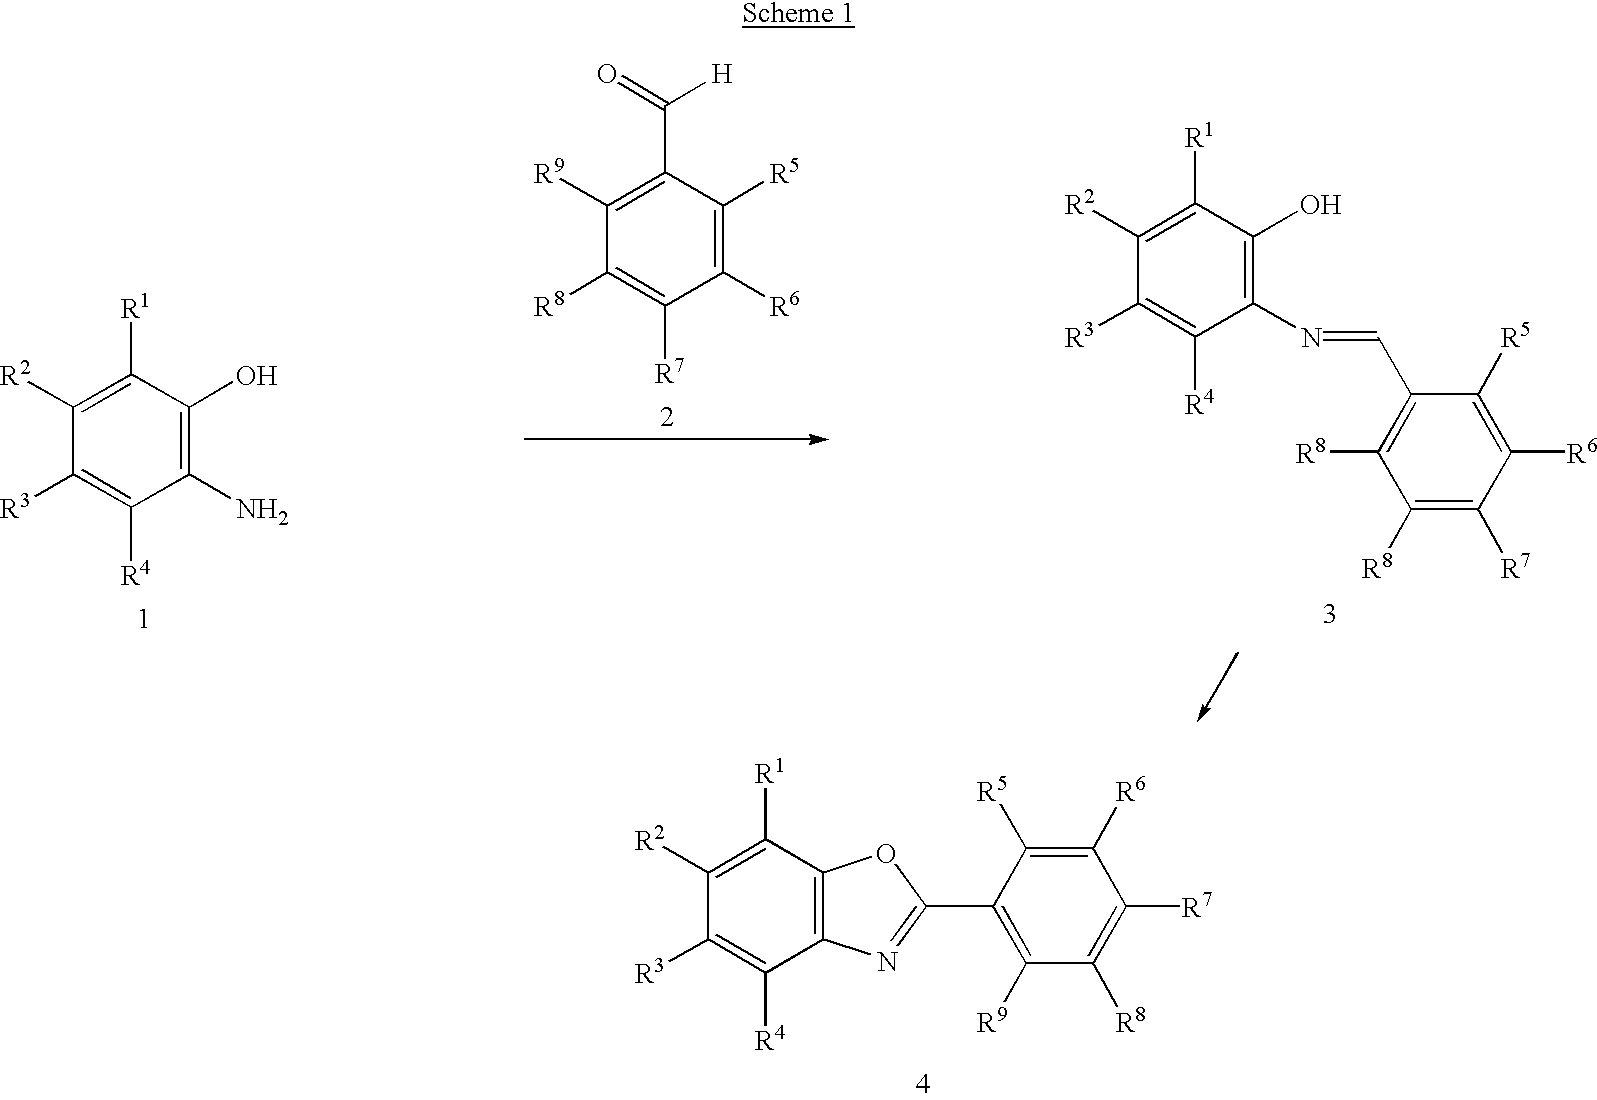 Solution phase sythesis of arylbenzoxazoles